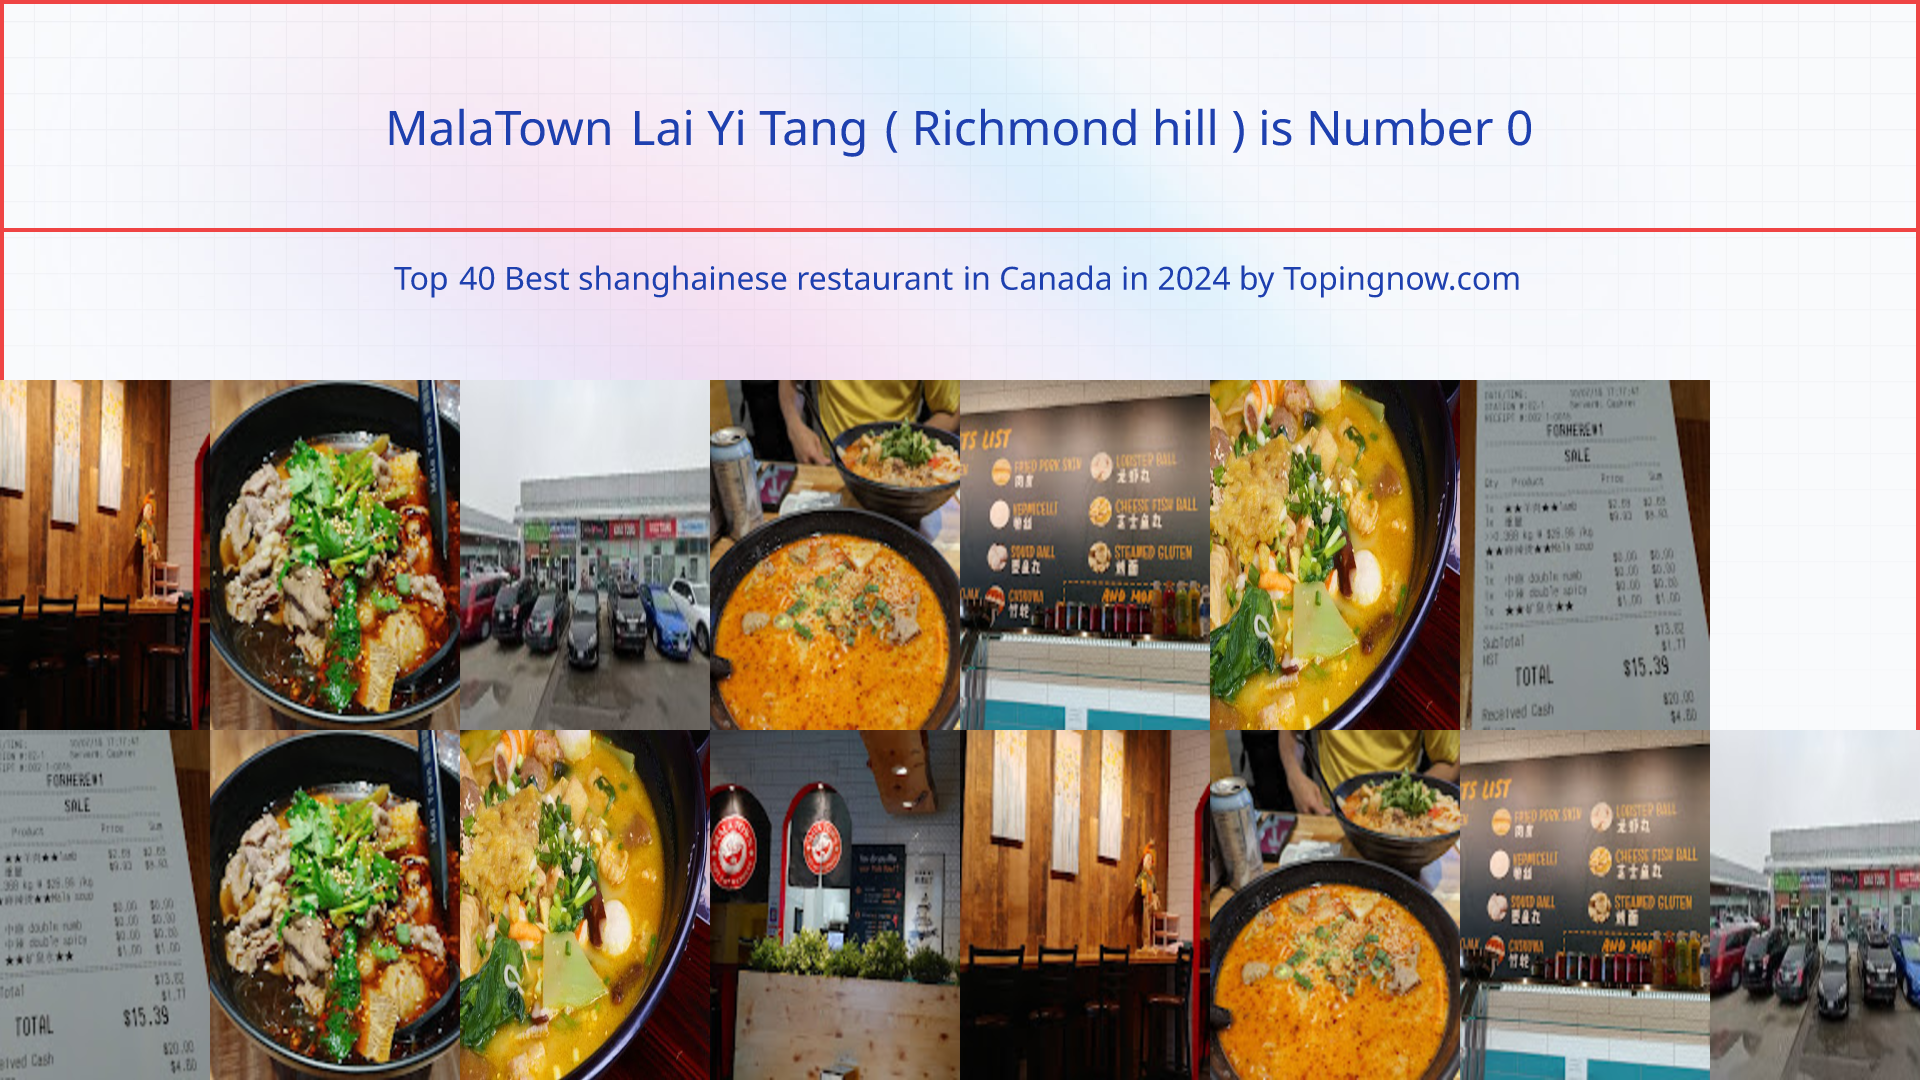 MalaTown Lai Yi Tang  ( Richmond hill ): Top 40 Best shanghainese restaurant in Canada in 2024